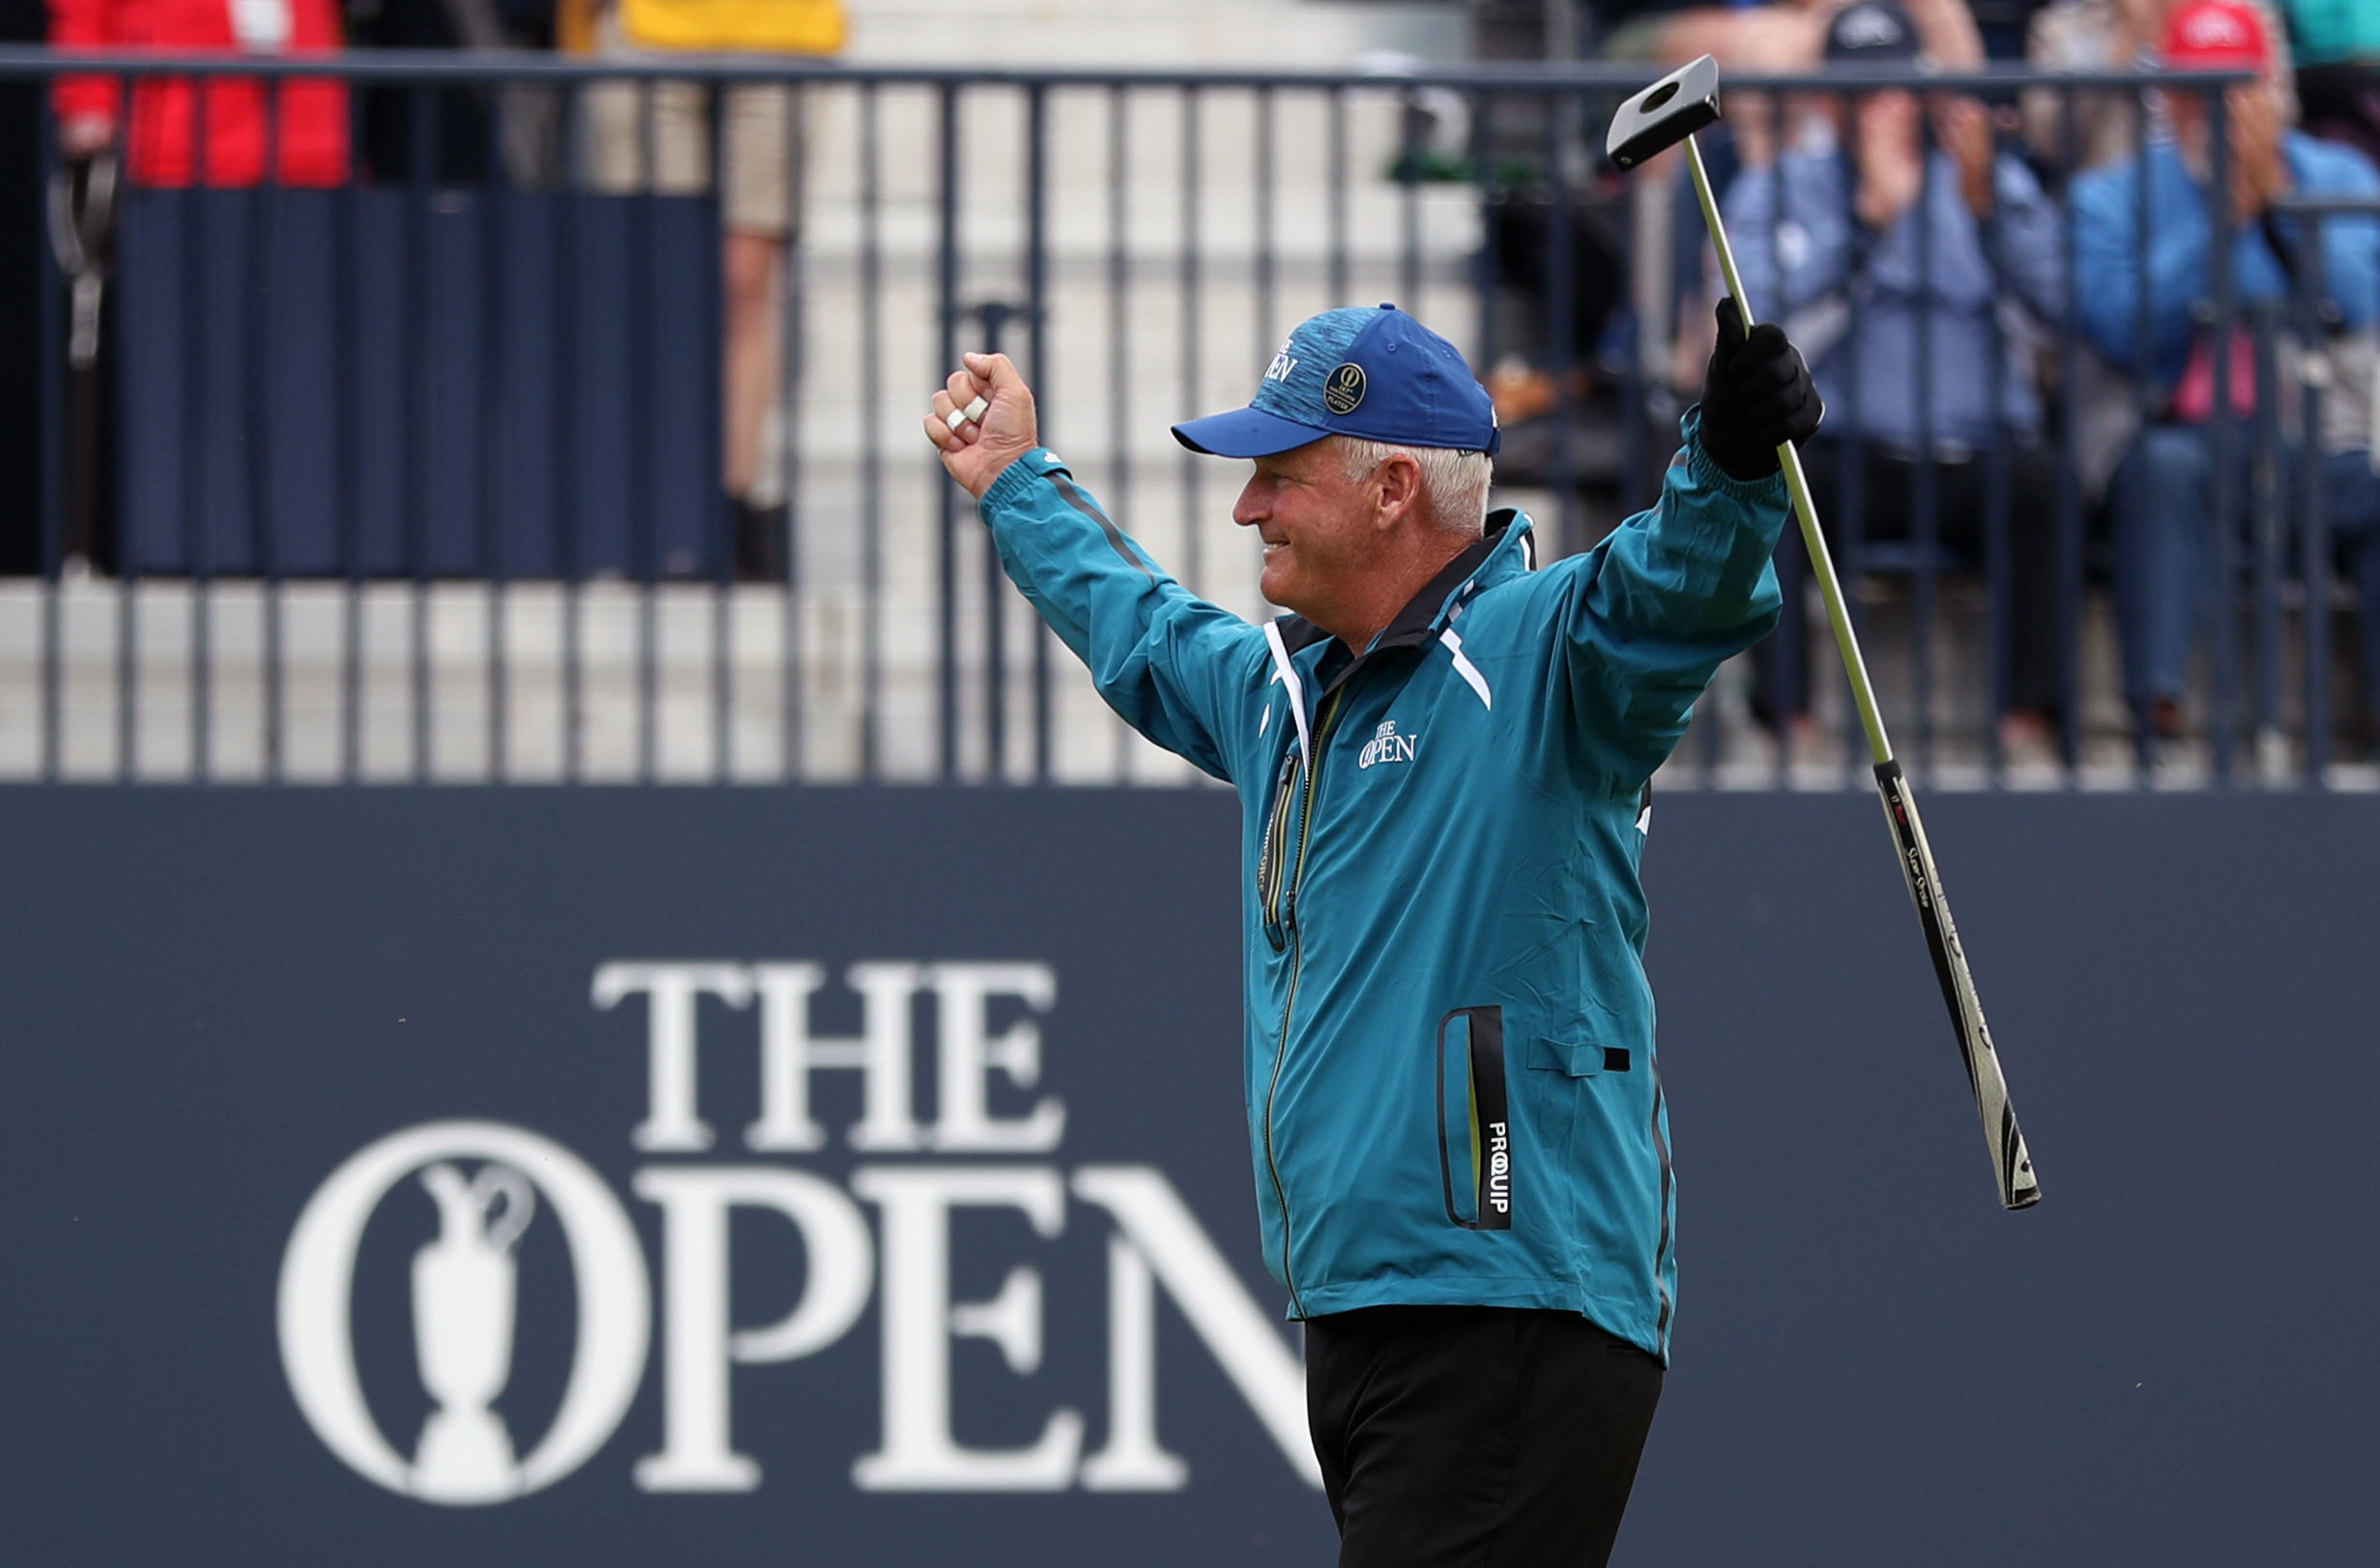 Sandy Lyle acknowledges the crowd on the 18th.